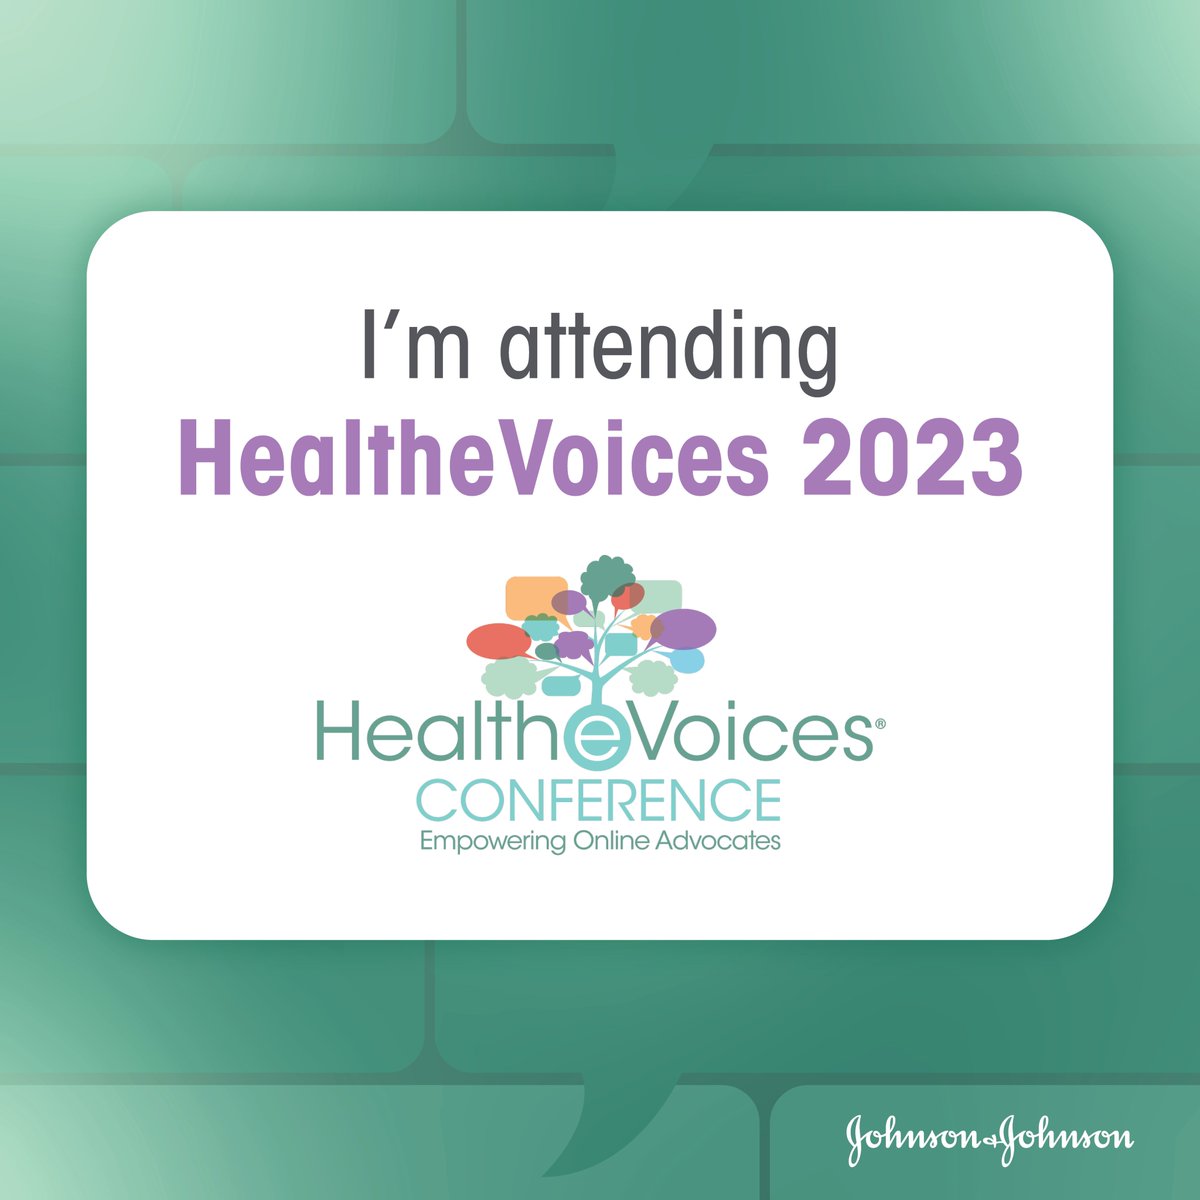 Next week I will be representing the AS/AxSpA community at the 2023 #HealtheVoices conference!

This is a time when patient leaders from all over the world come together to better their patient leadership skills. This will be my 4th time attending in person or virtually.